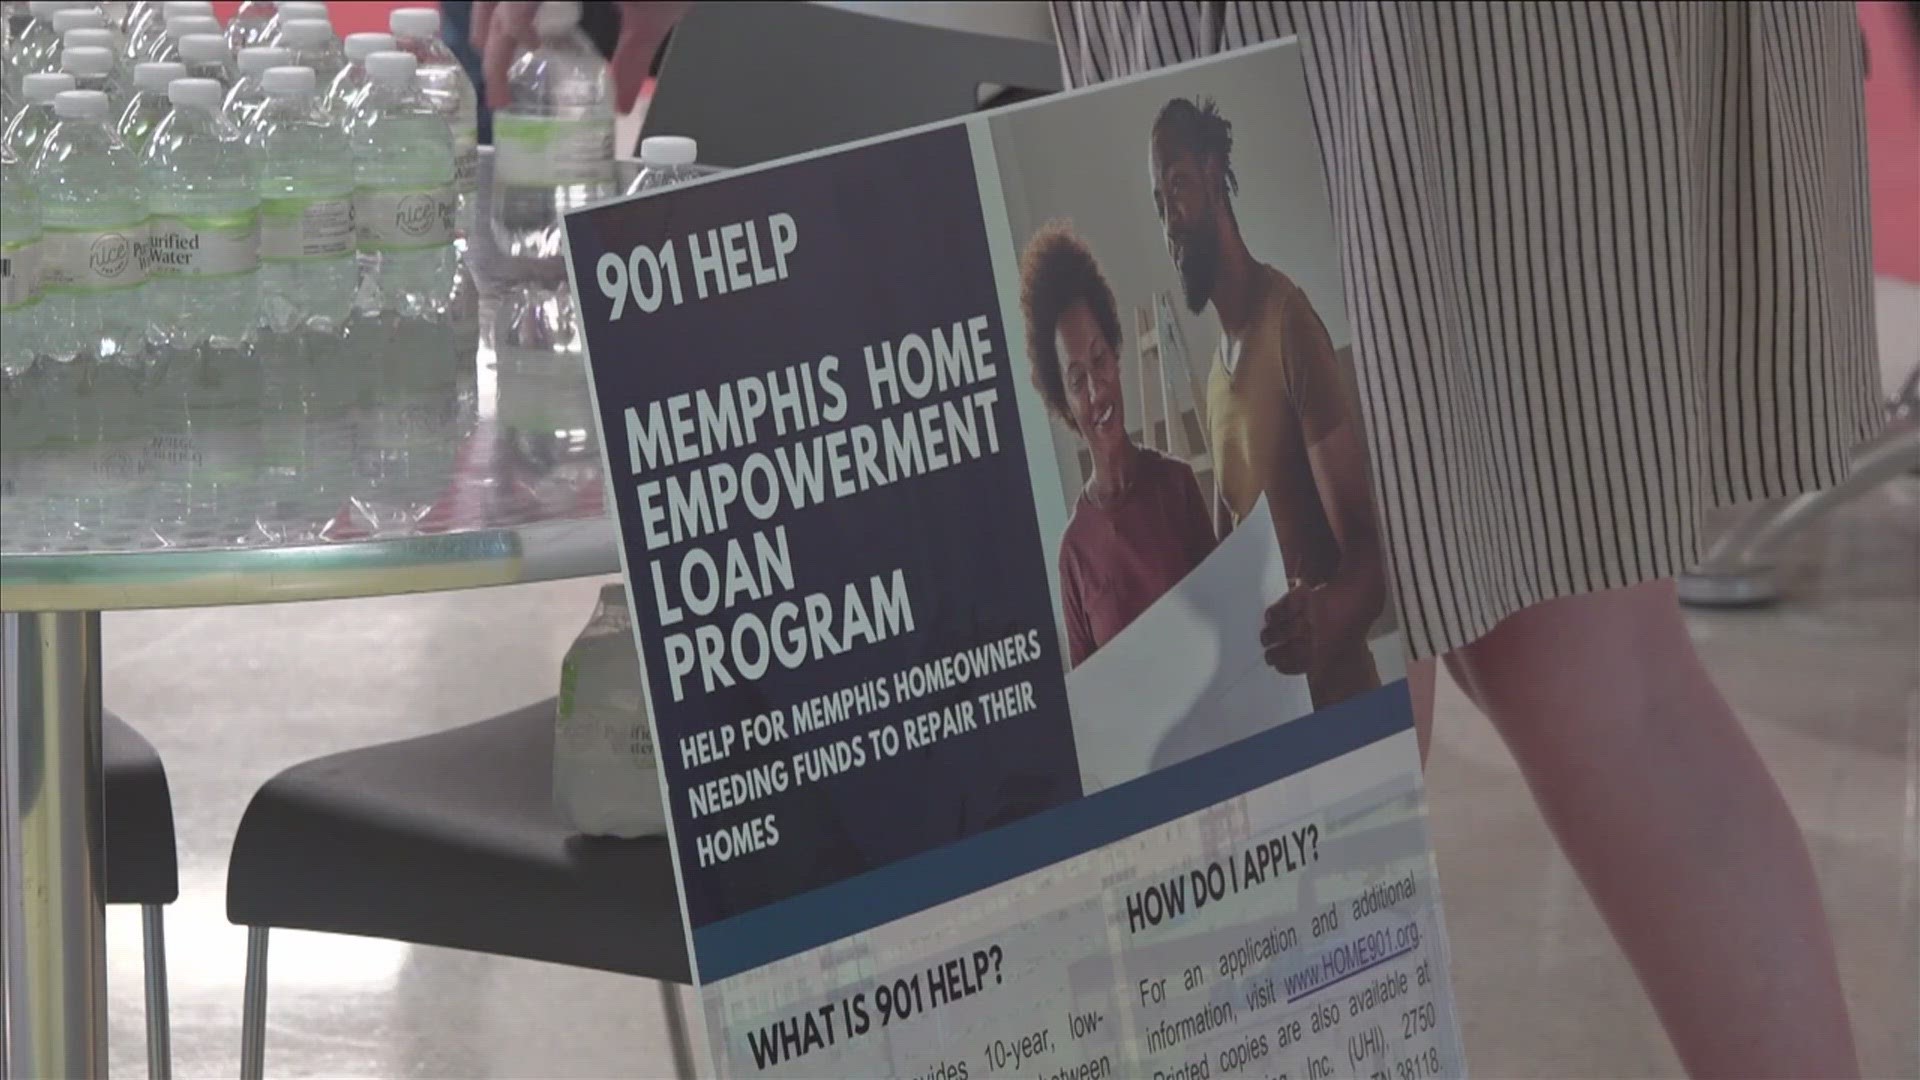 The city said the program is designed to help low to moderate-income homeowners stay in their homes.